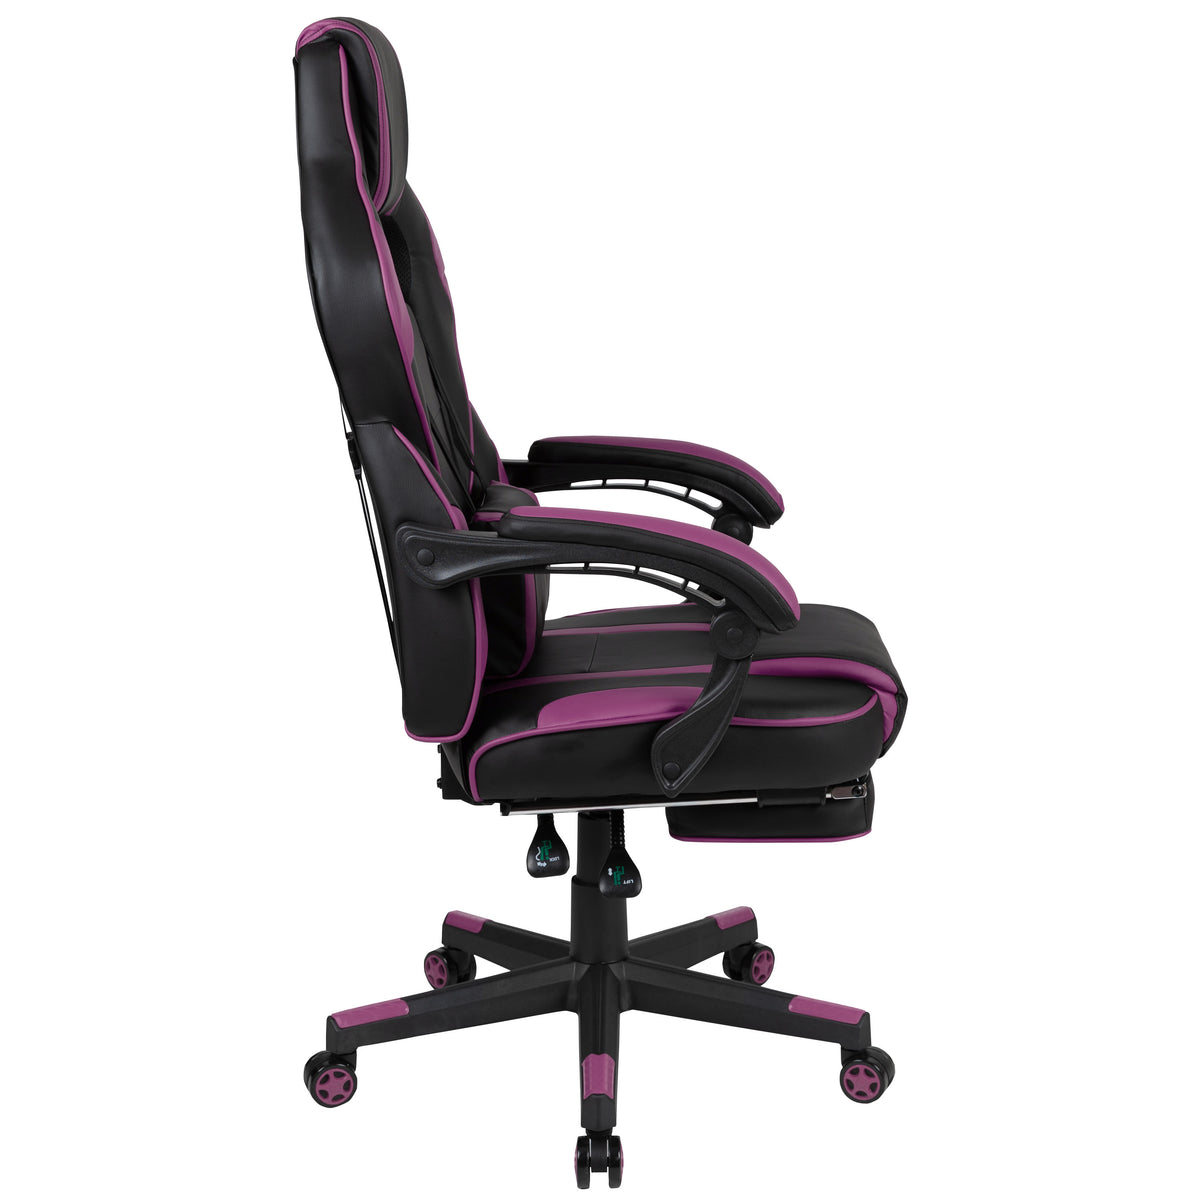 Black with Purple Trim |#| Fully Reclining Gaming Chair with Slideout Footrest, Lumbar Massage-Black/Purple